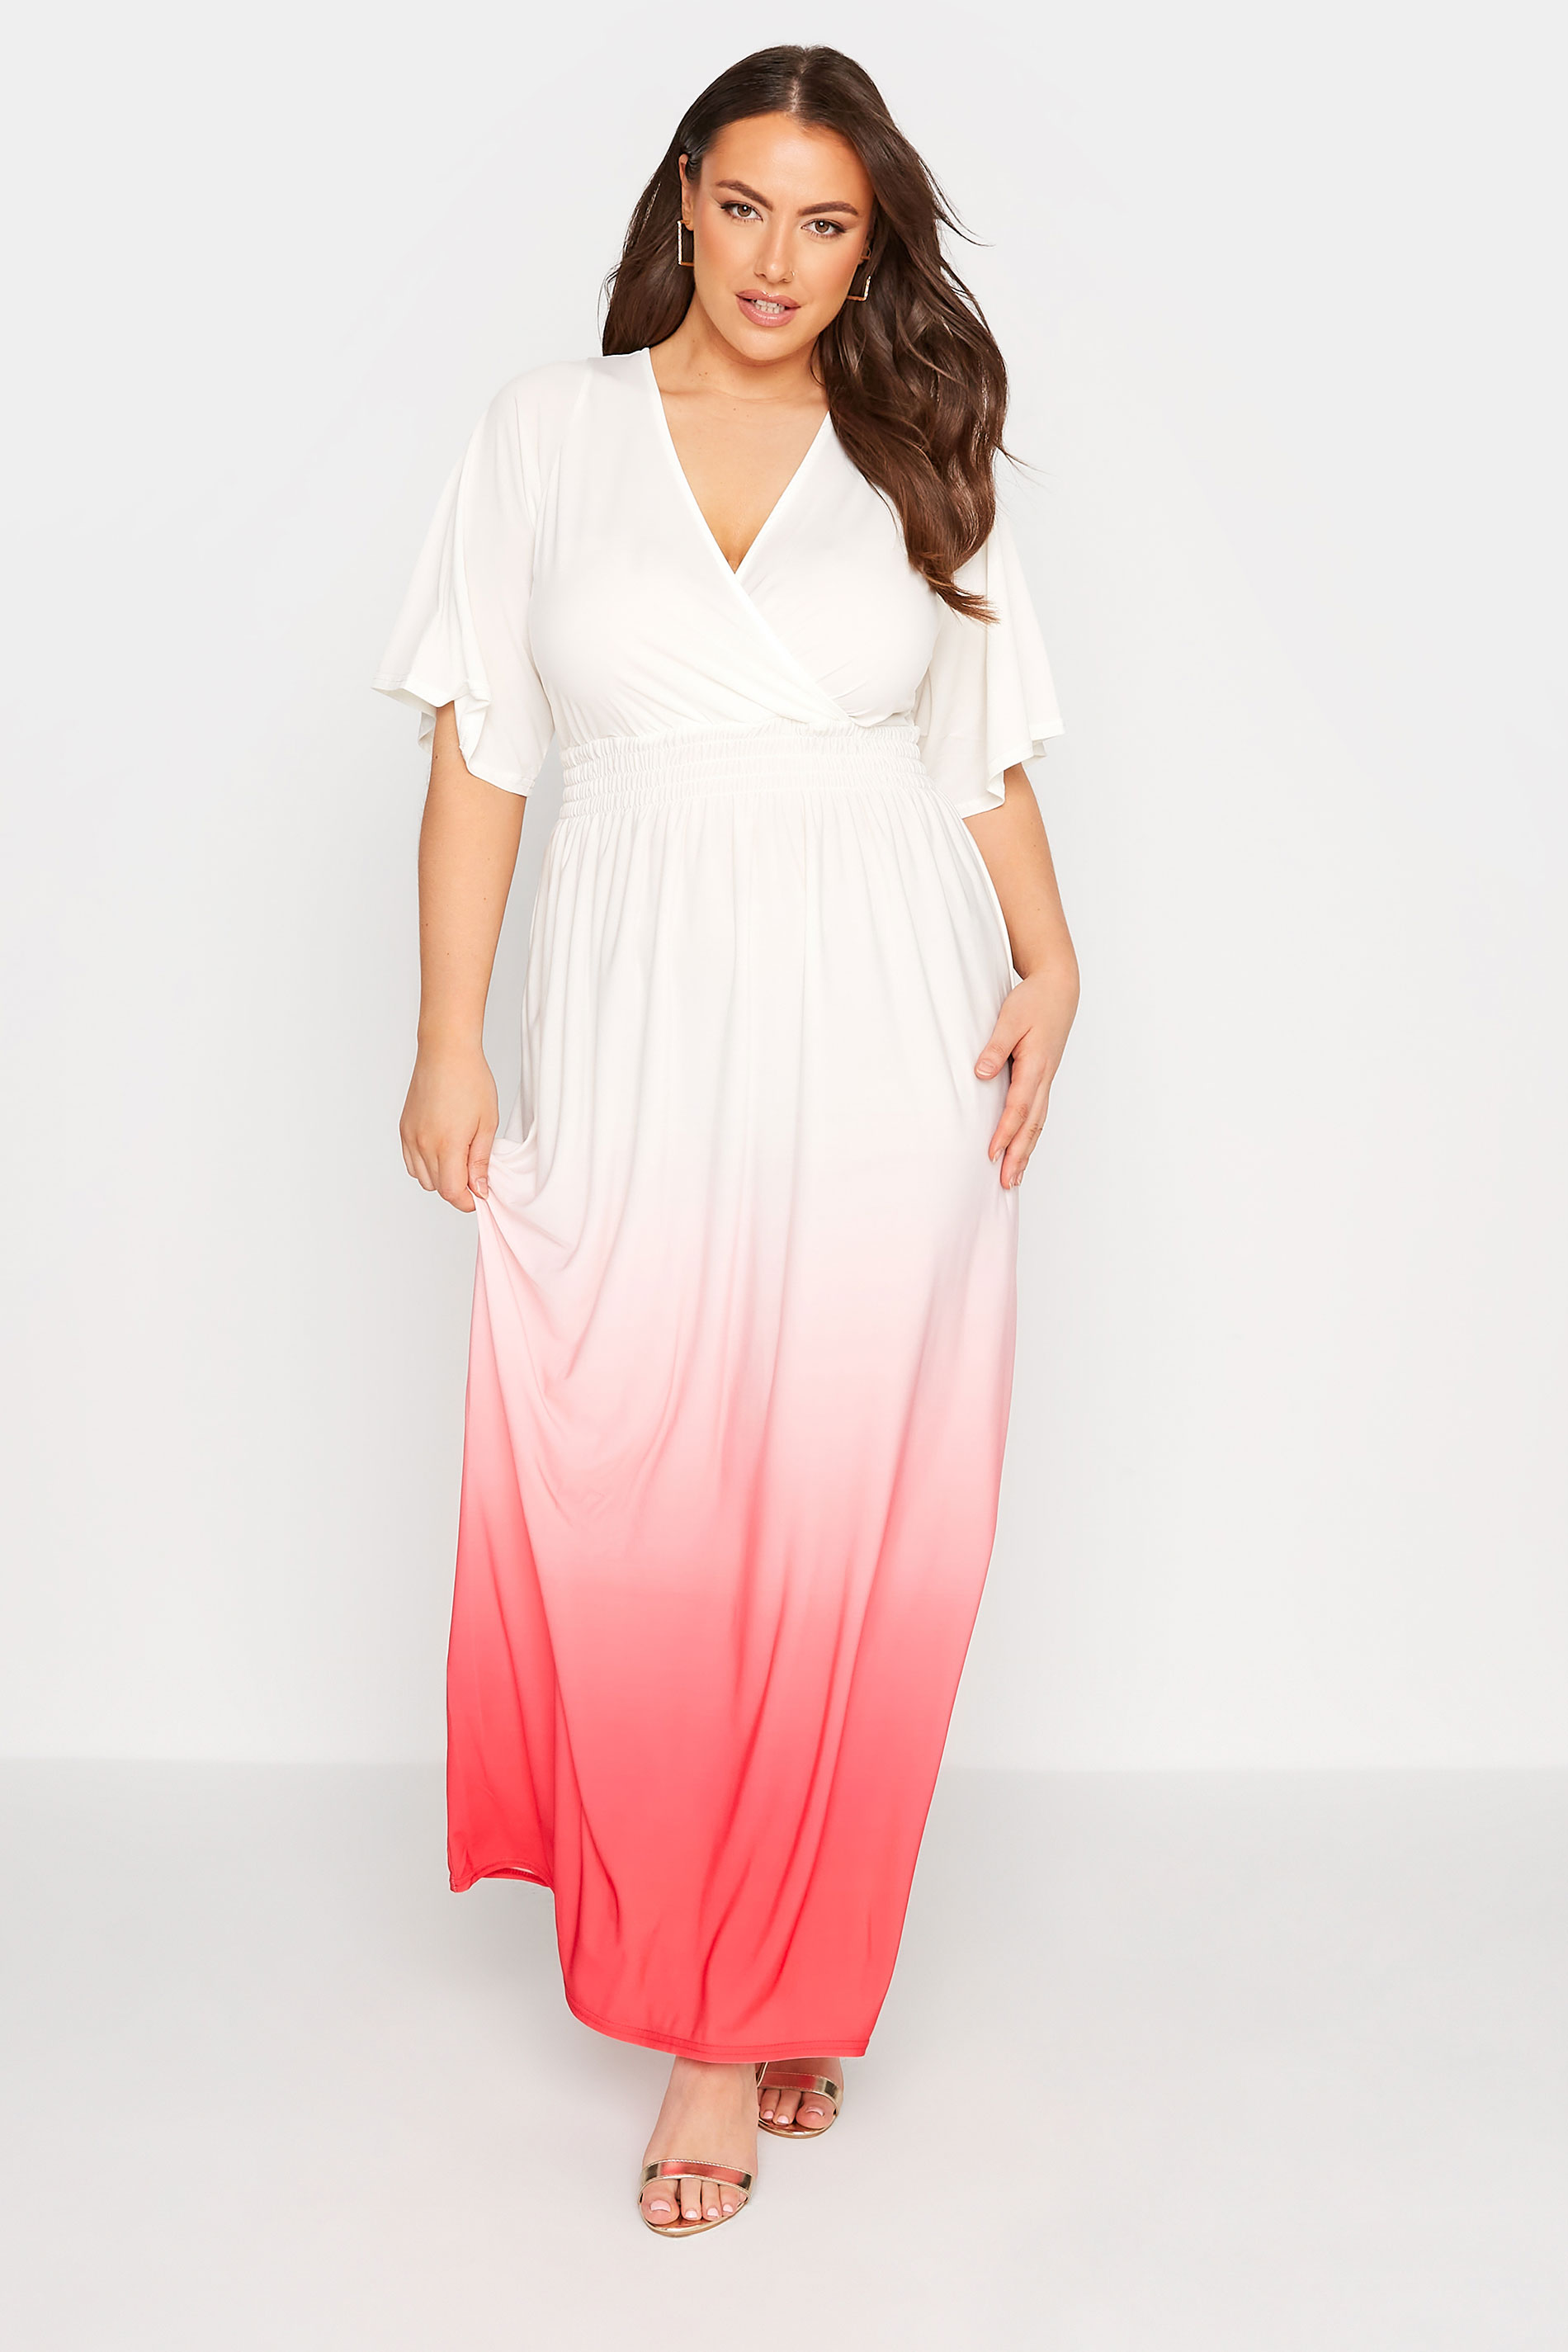 Robes Grande Taille Grande taille  Robes Longues | YOURS LONDON - Robe Blanche Maxi Ombré Rose - FE73842